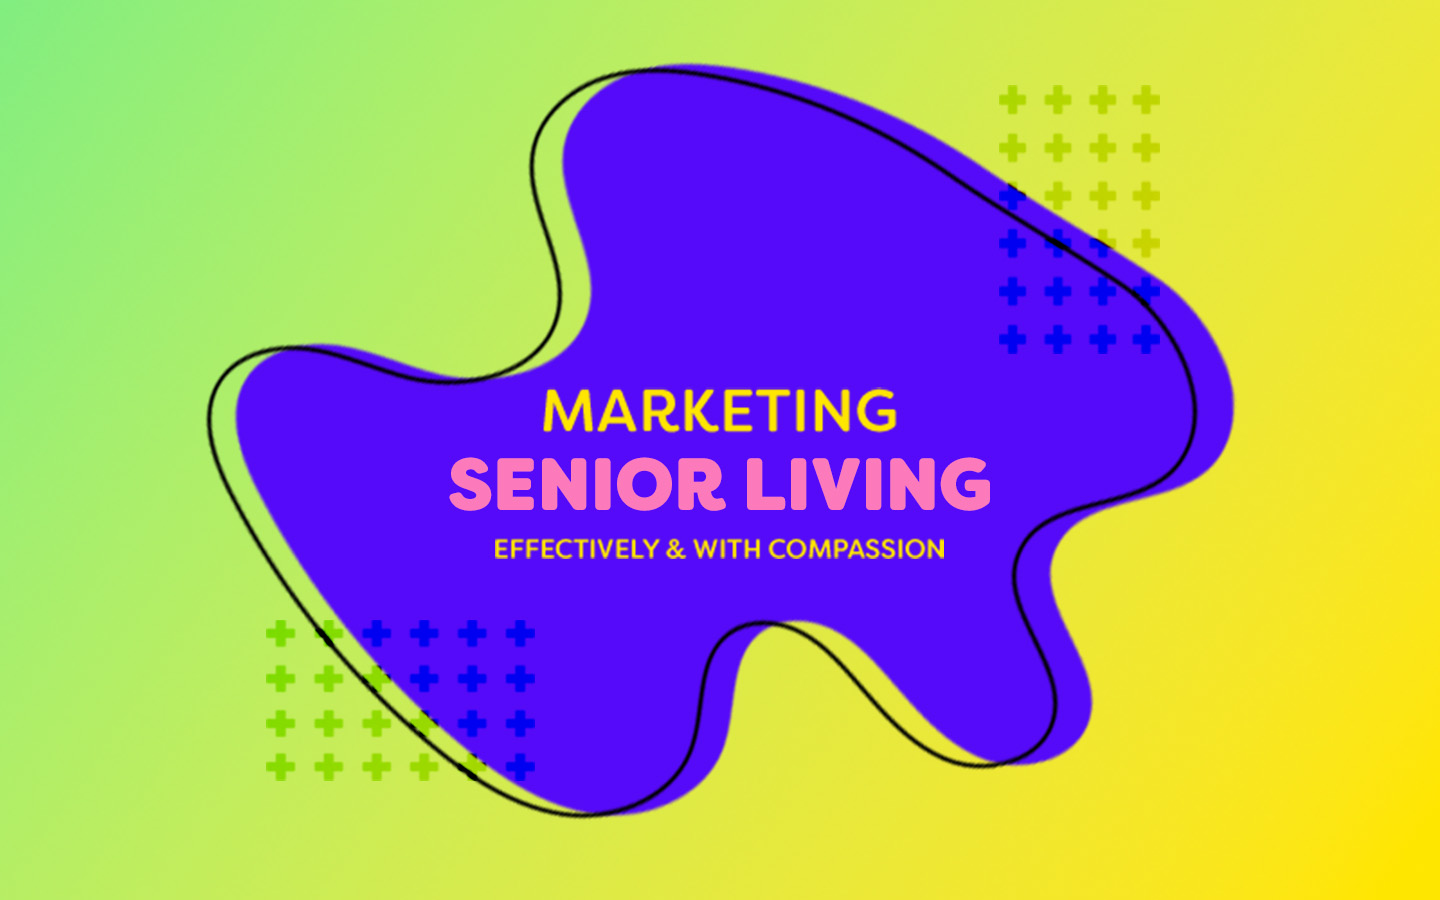 Marketing Senior Living Effectively and with Compassion